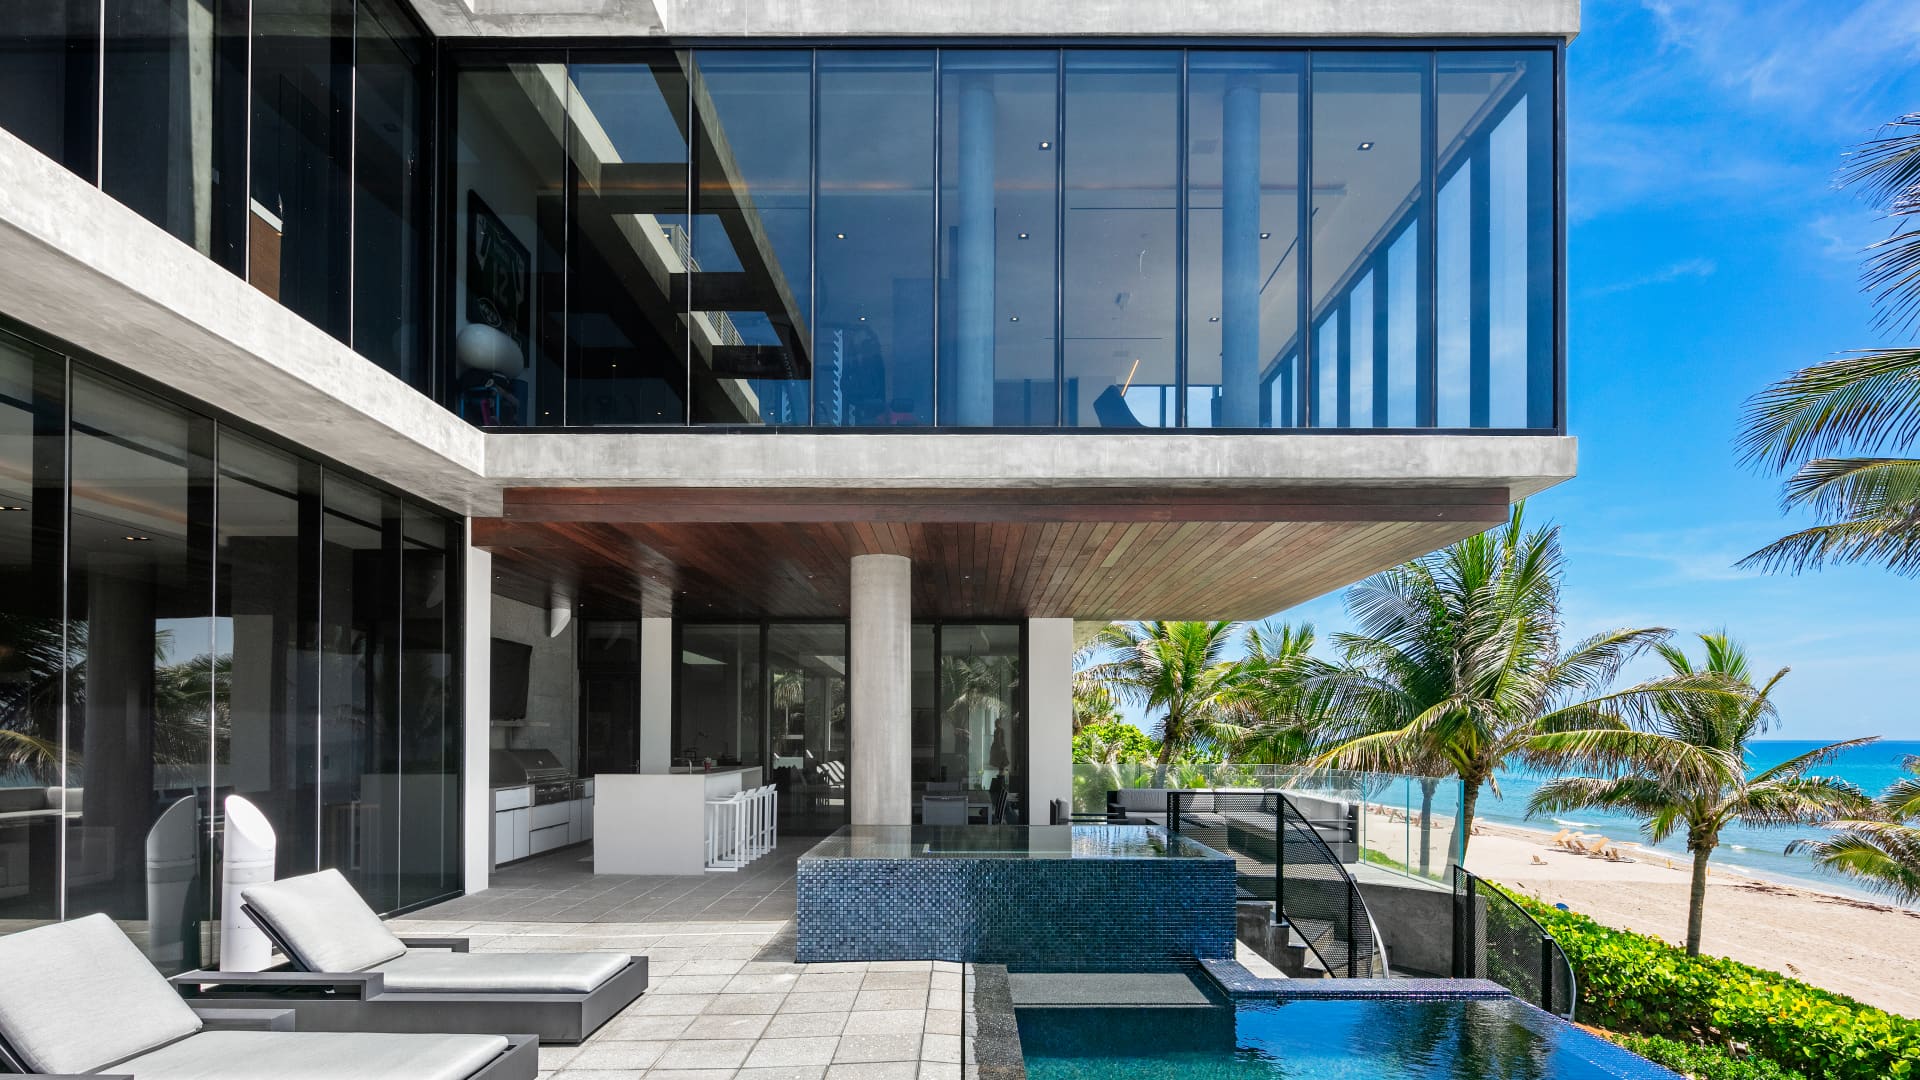 The third floor of the residence includes a cantilevered home office that overlooks the infinity pool and ocean.